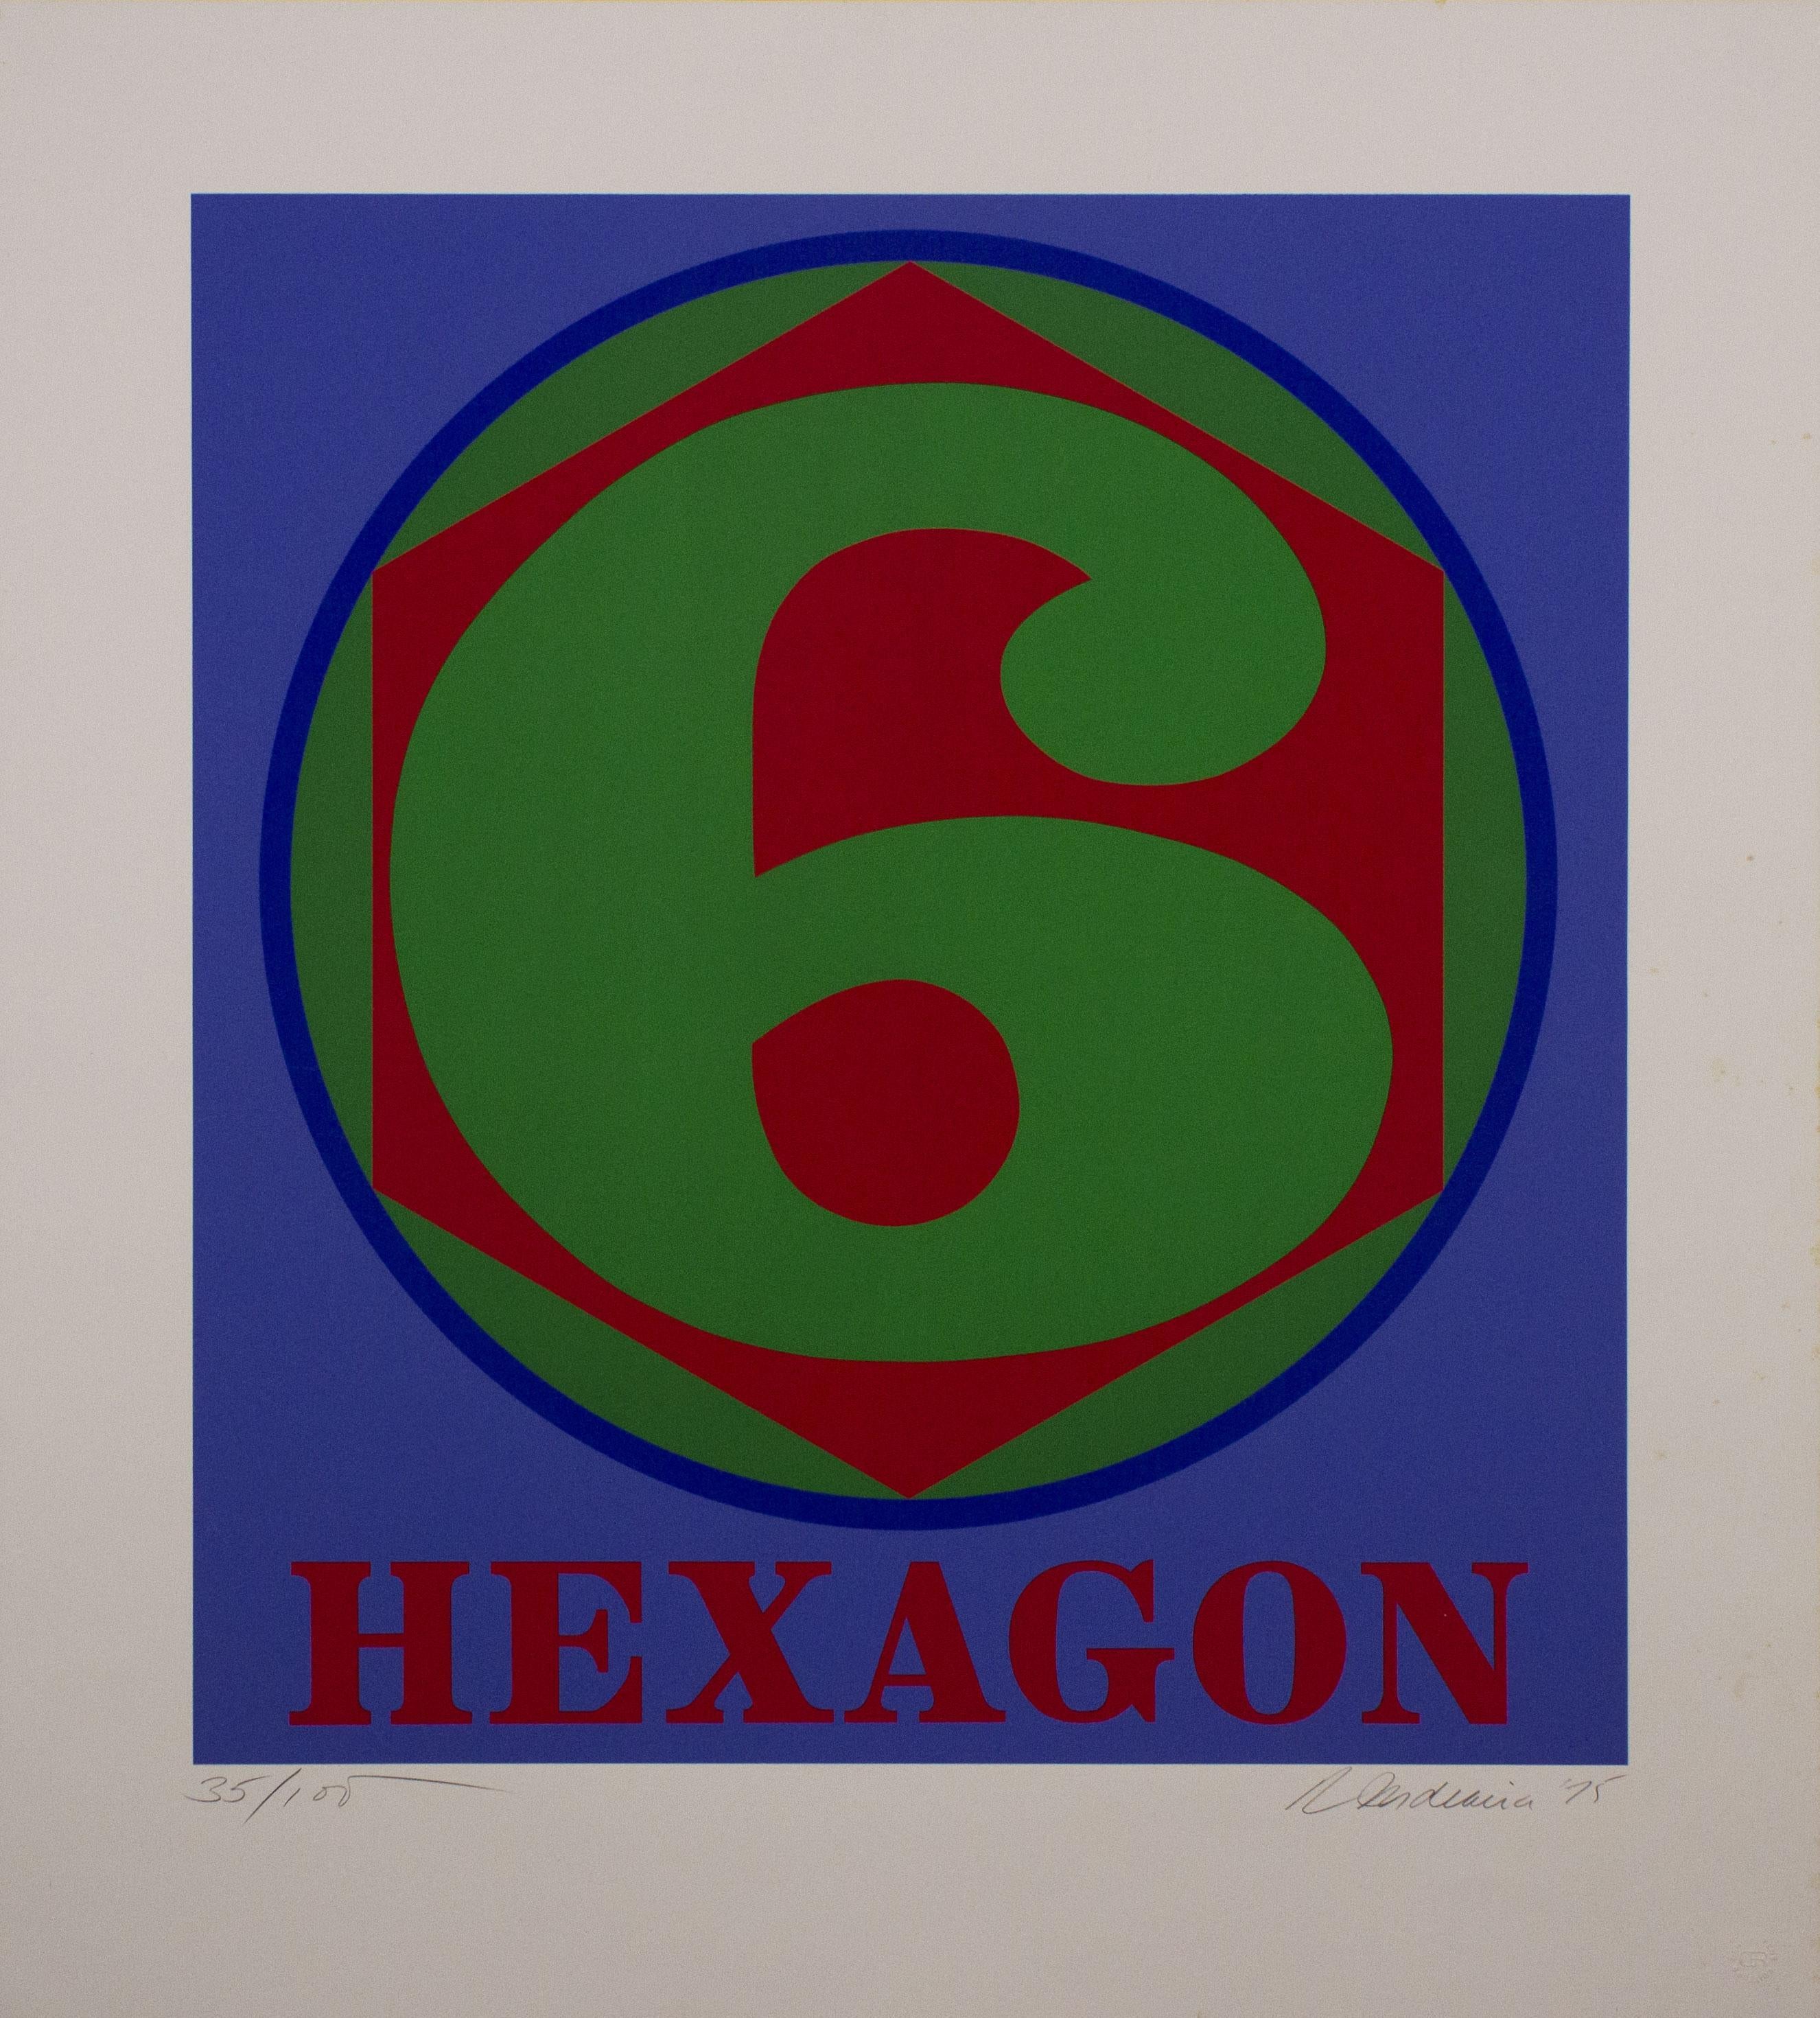 Robert Indiana, from the Polygons portfolio published in 1975.
A screenprint on Arches 88 paper signed, dated and numbered out of an edition of 100.
A beautiful example of one of the most iconic and known subject by the Pop Art master Robert